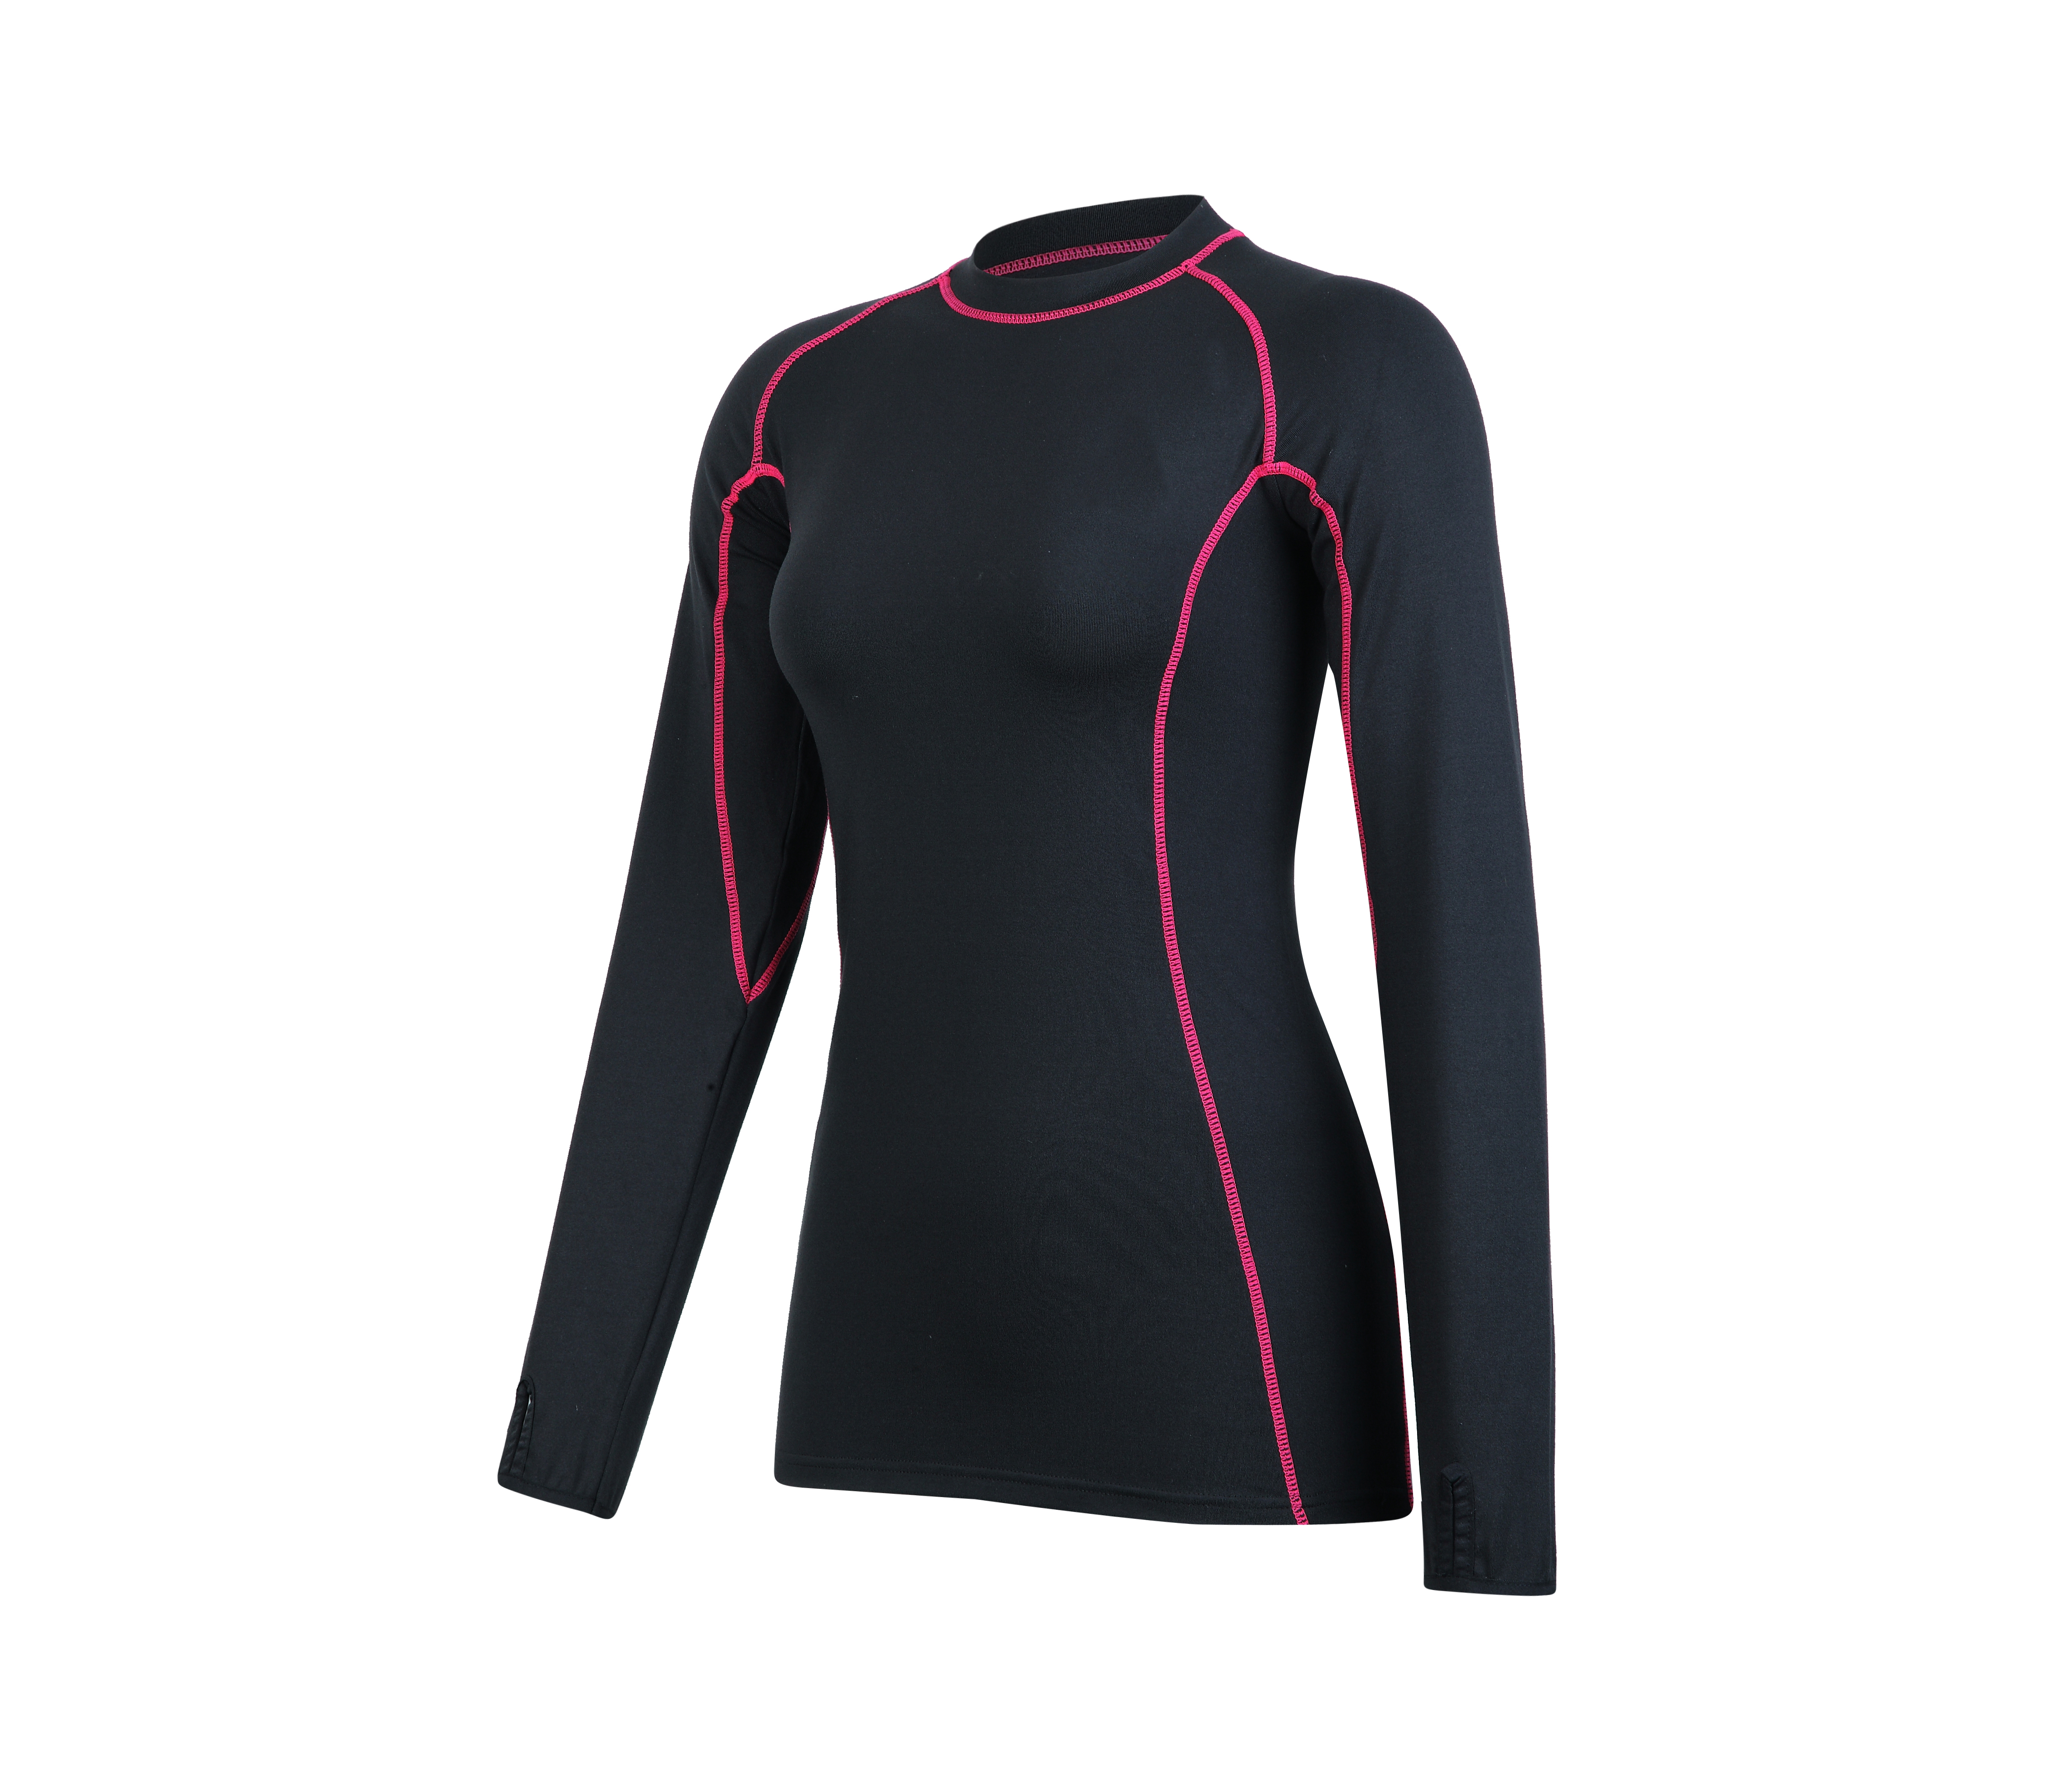 Women’s knitted flat lock compression top.